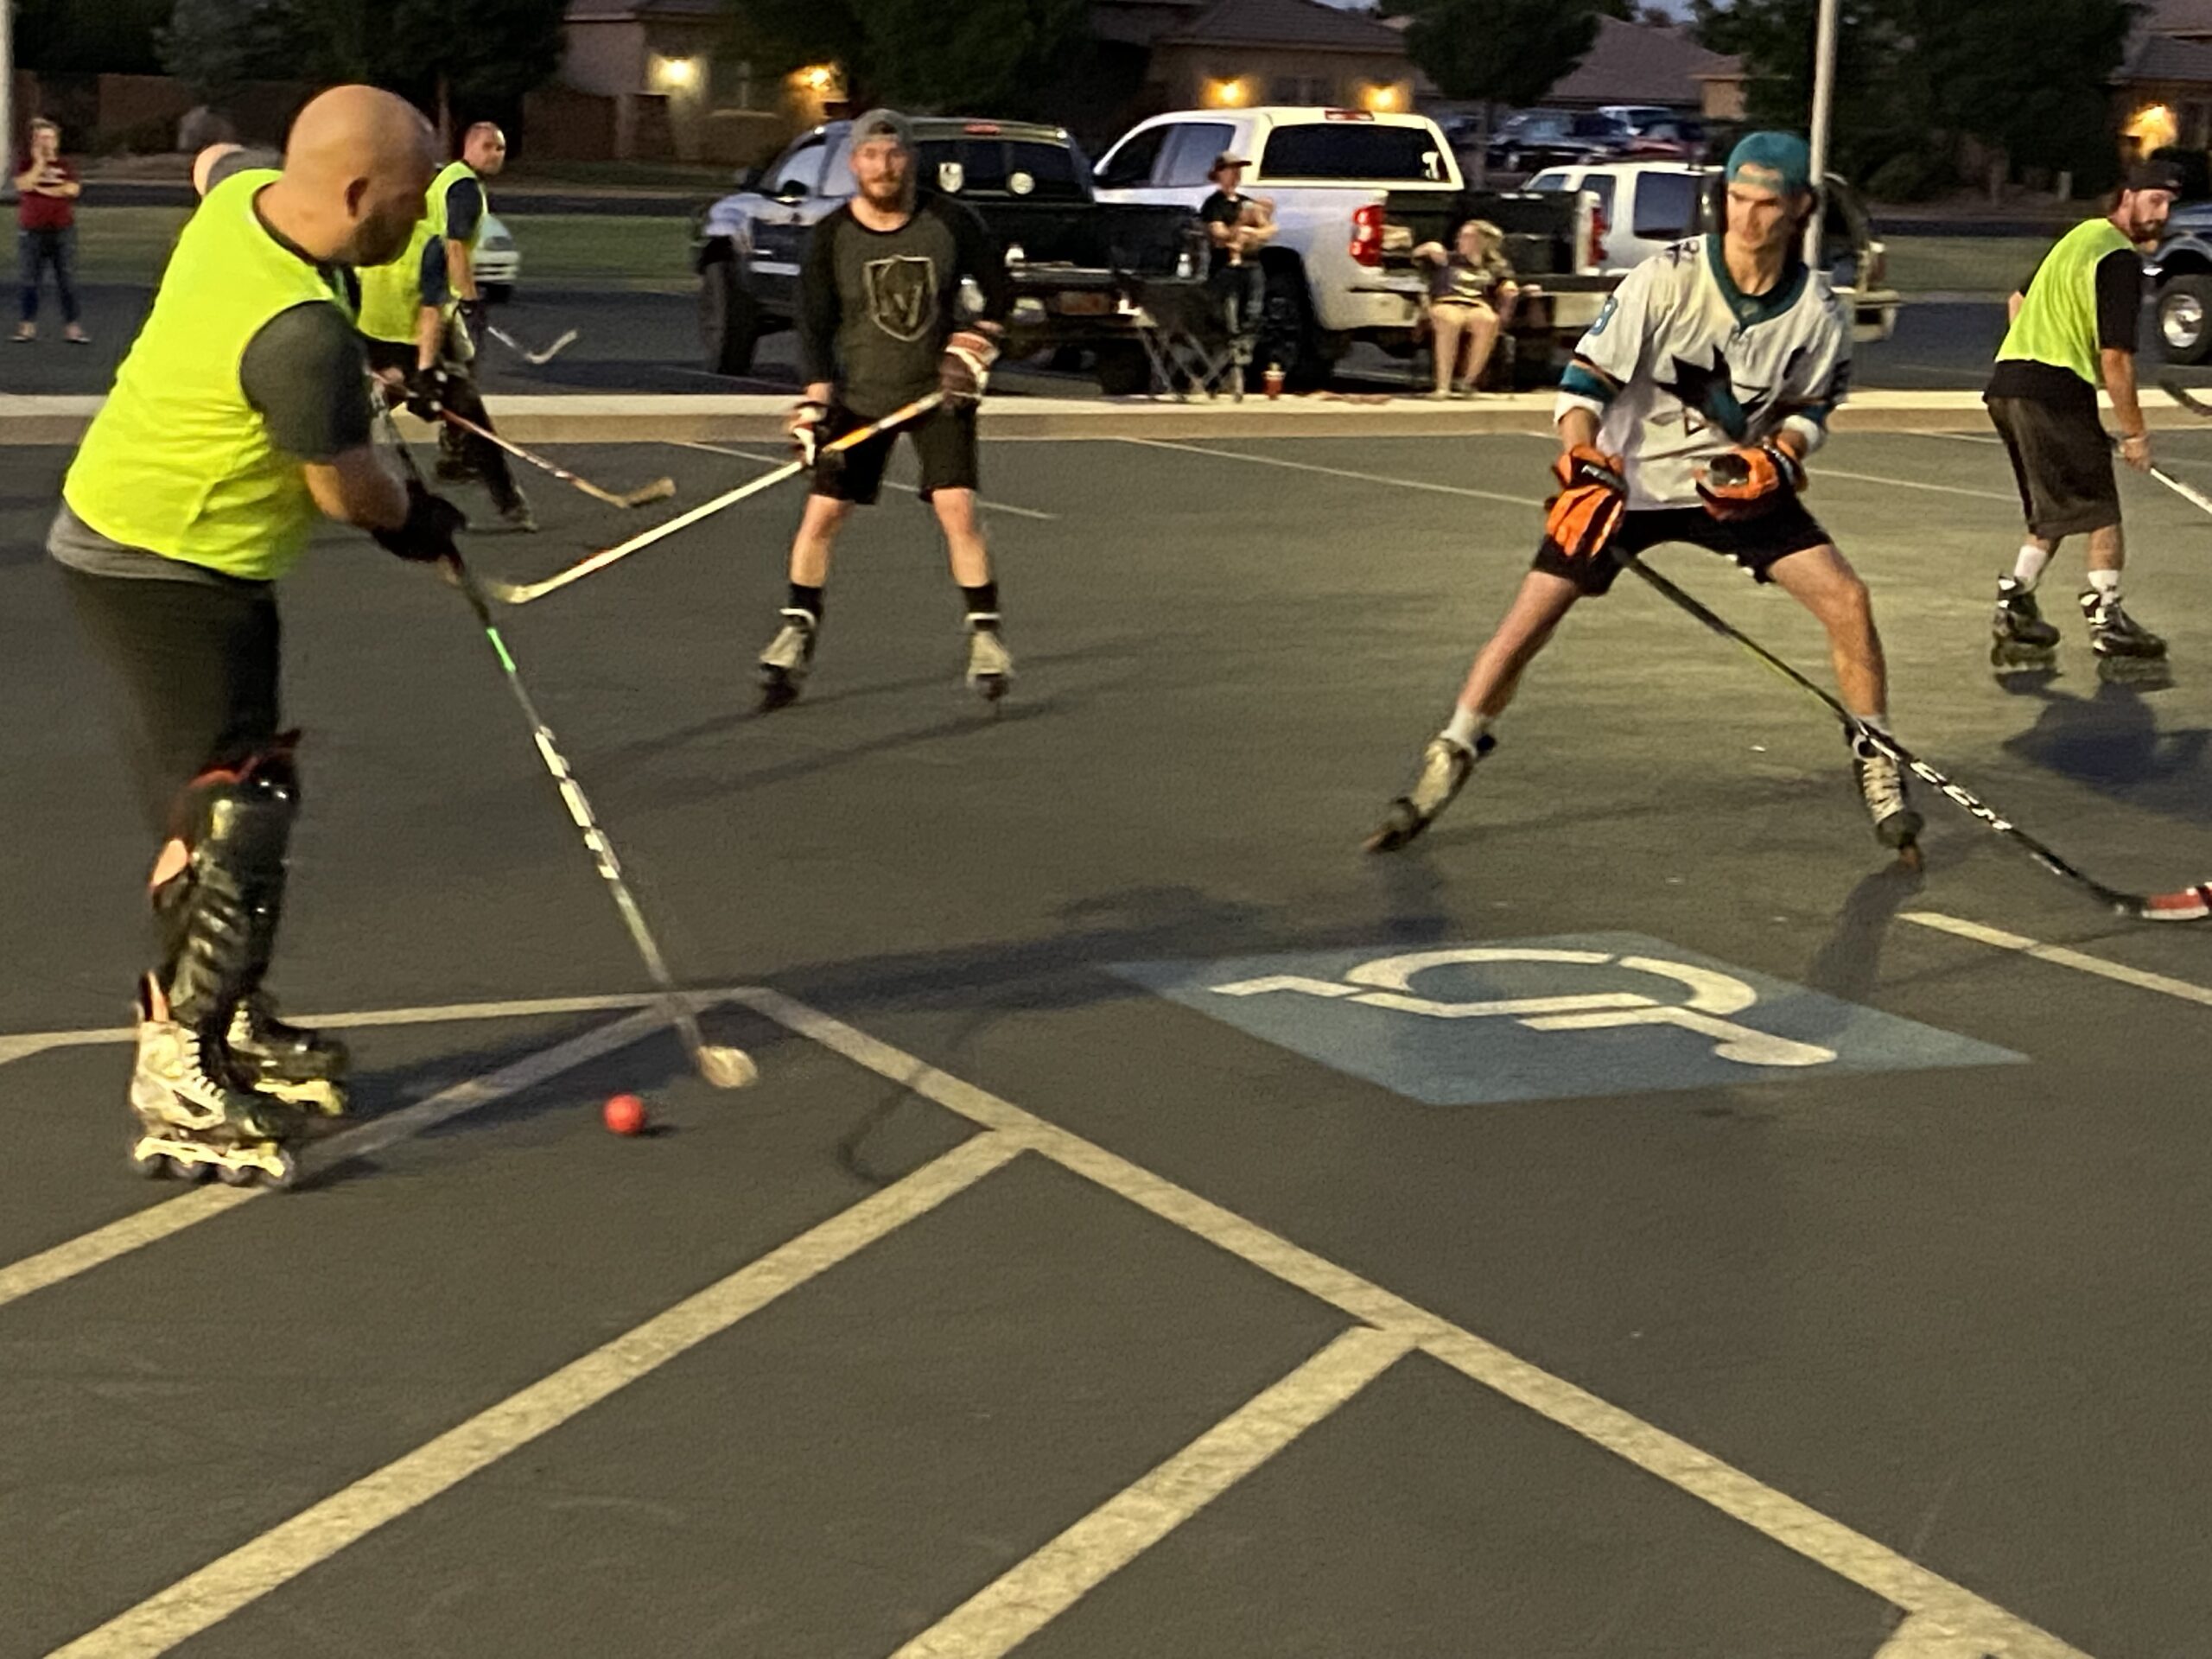 Red Rock Hockey offers skill clinics, games for kids and adults at St.  George roller hockey rink – St George News